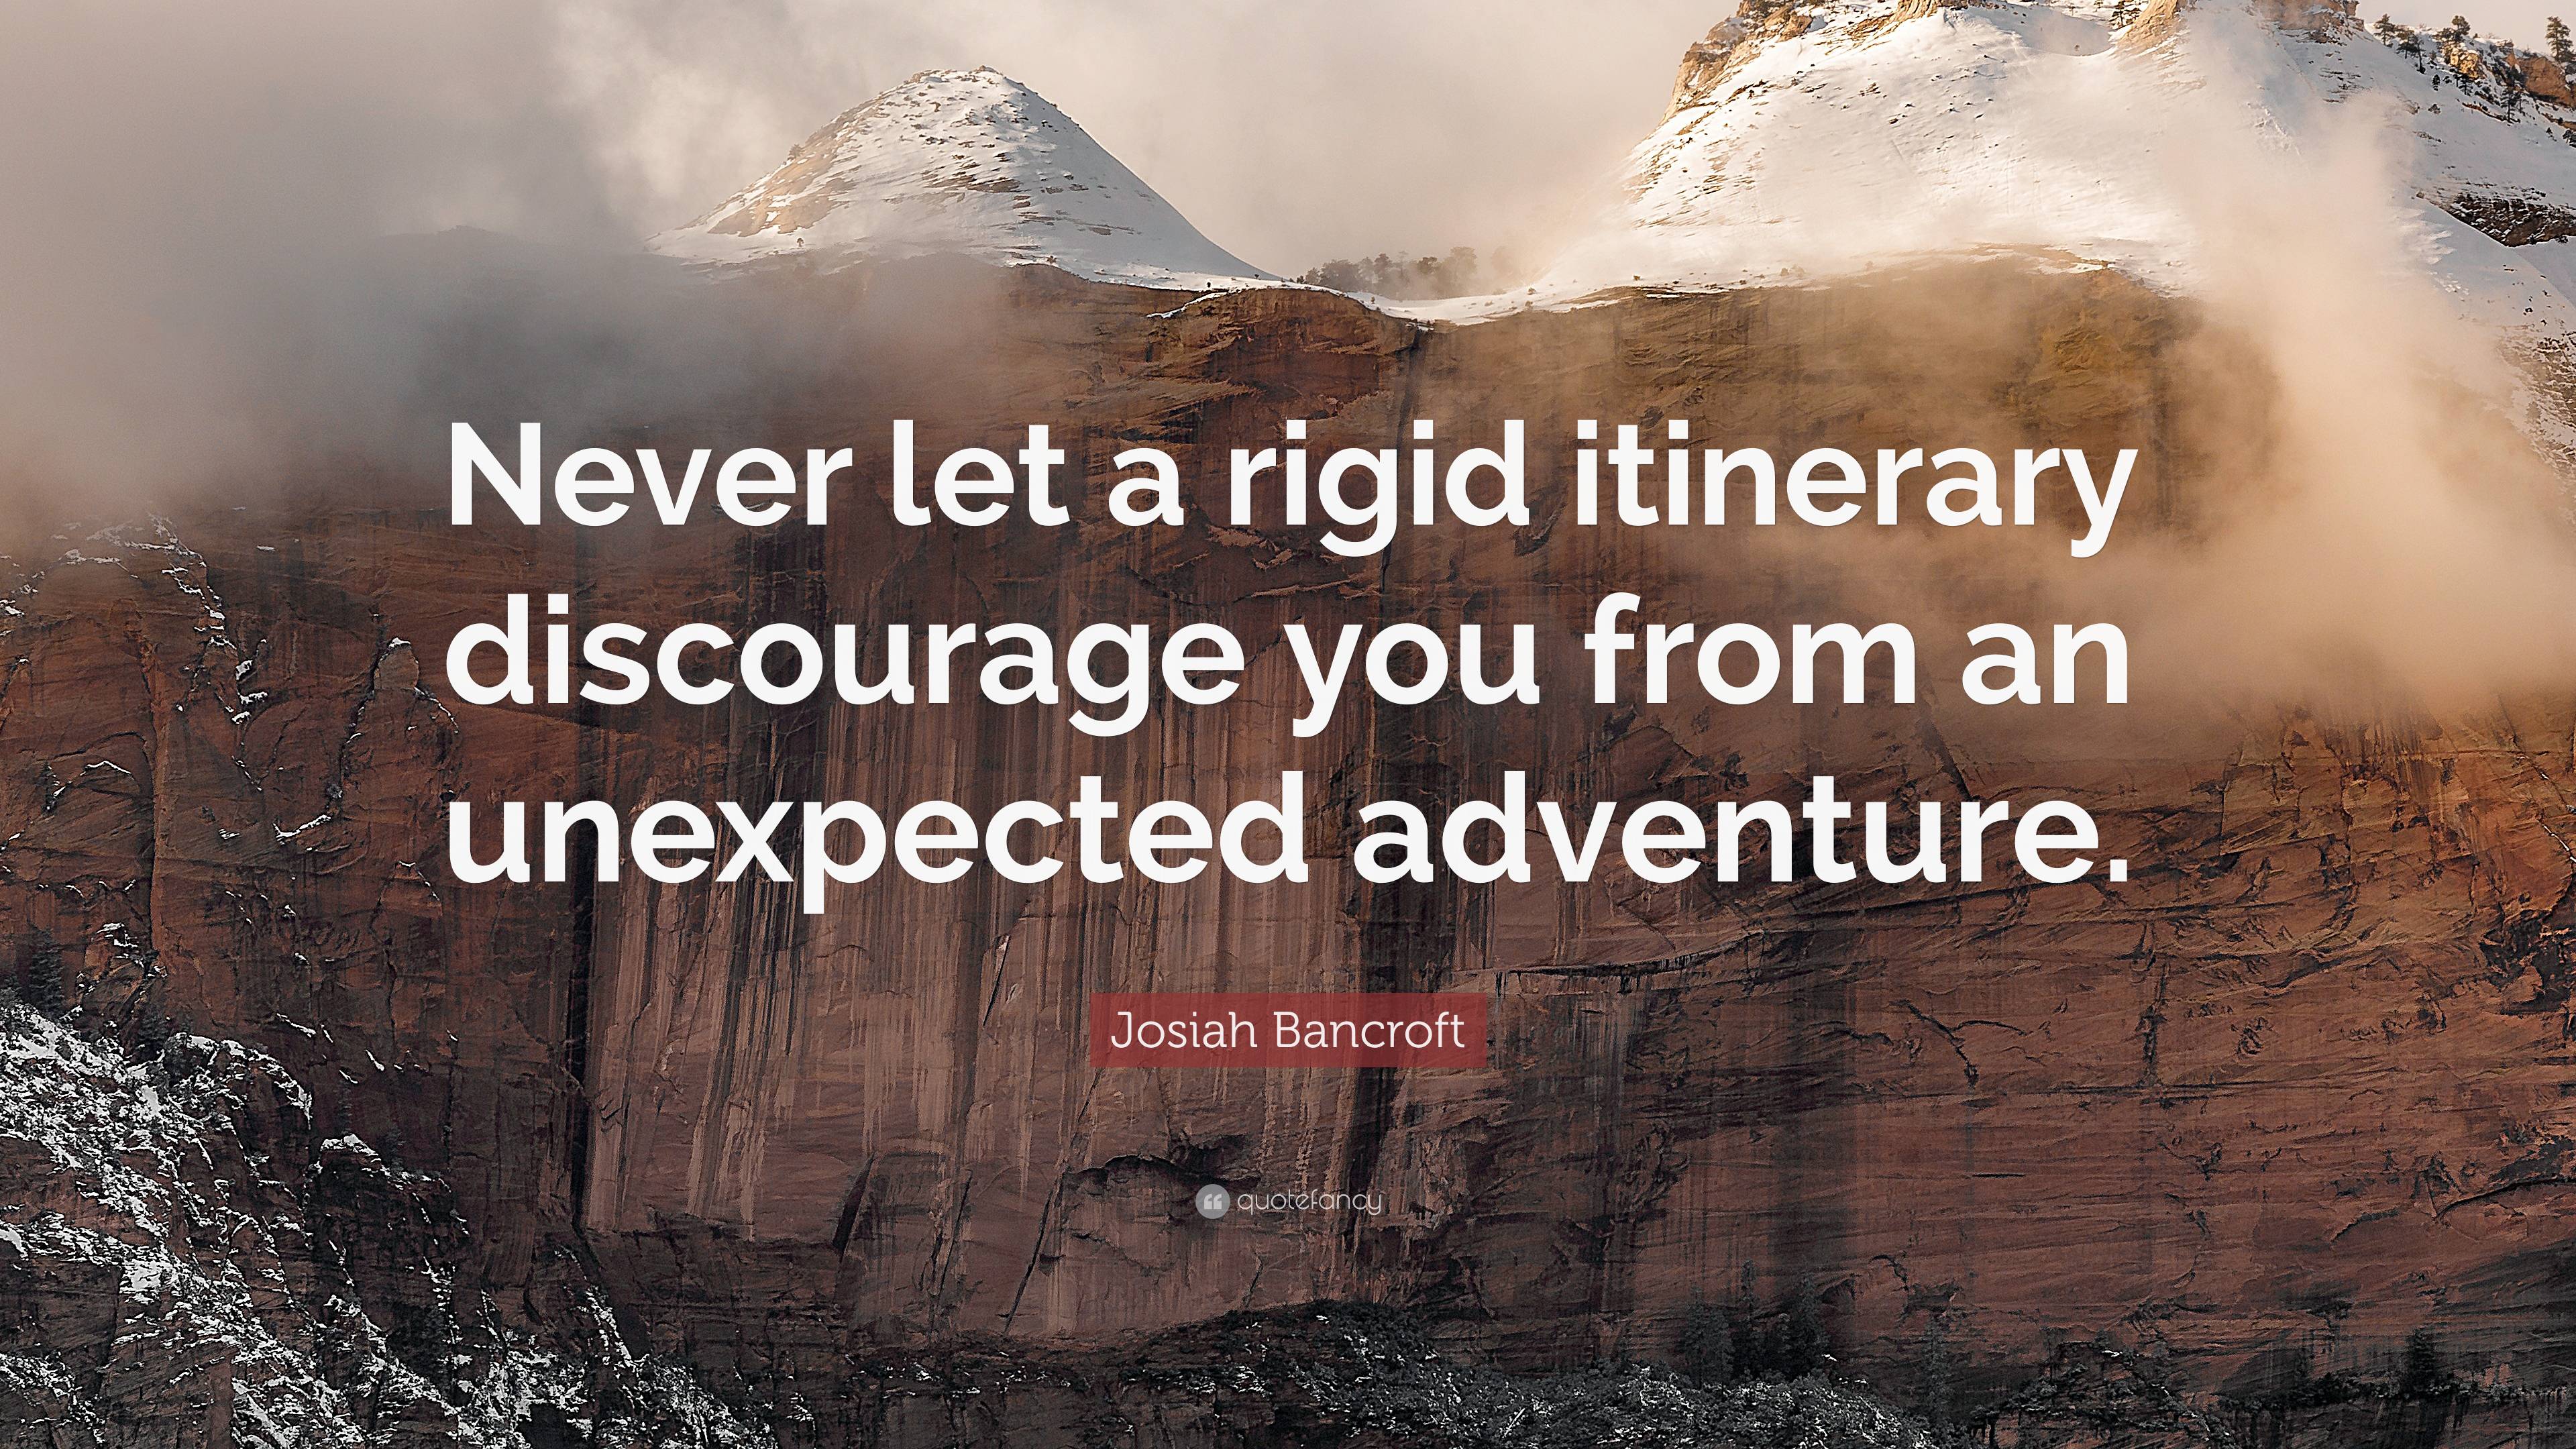 Josiah Bancroft Quote: “Never let a rigid itinerary discourage you